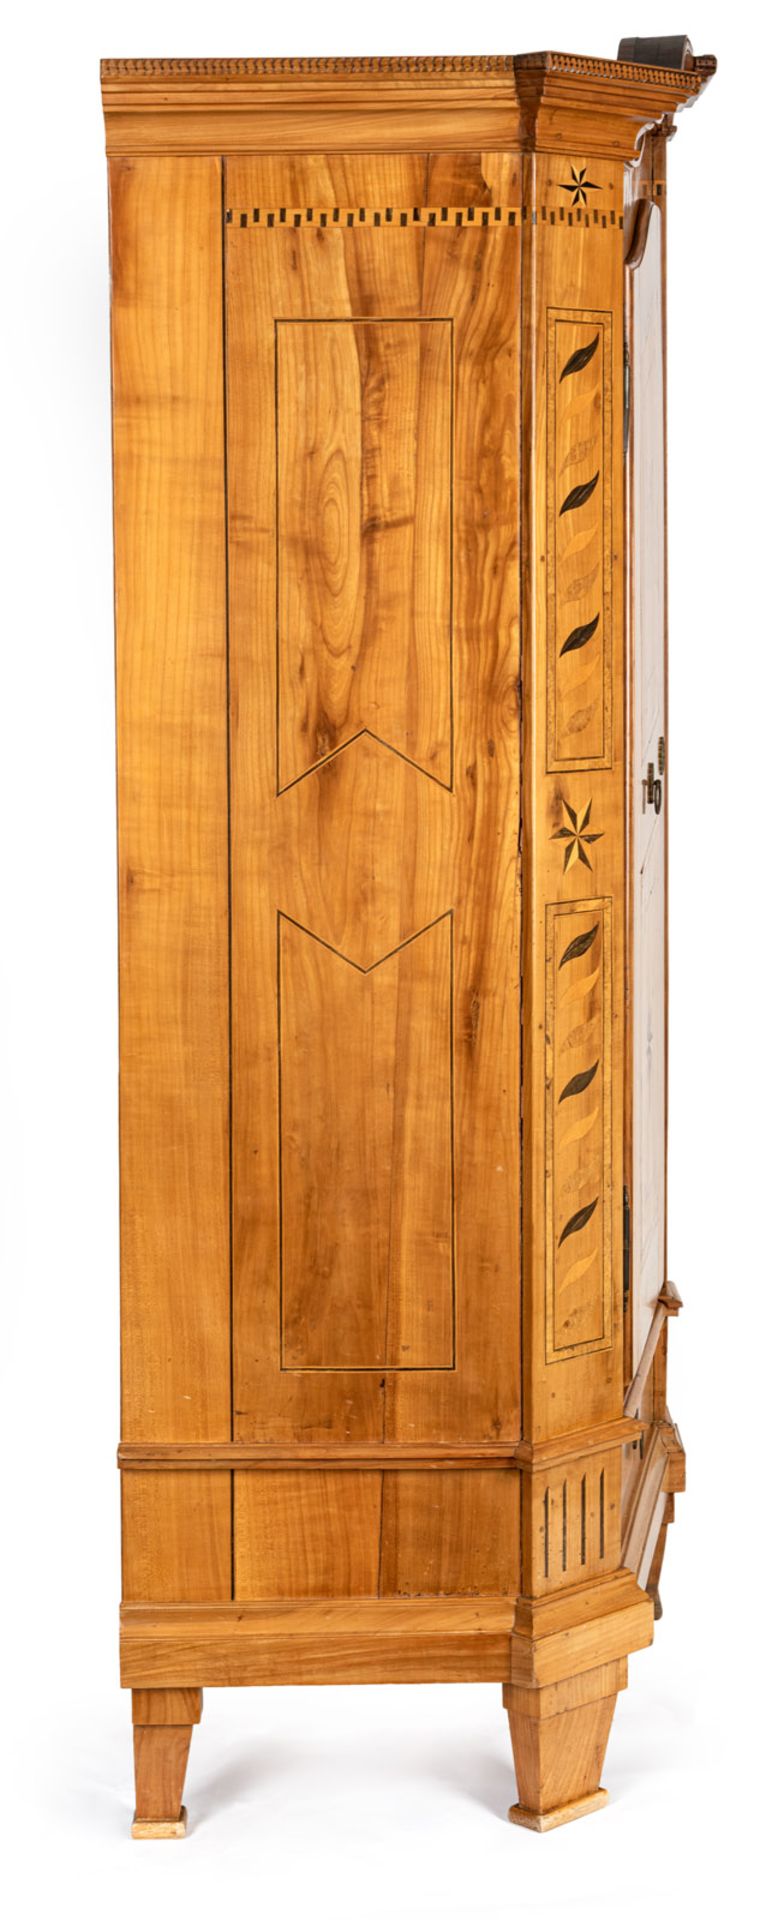 A CHERRYWOOD MAPLE MOOR OAK AND OTHERS "BODENSEE" CUPBOARD - Image 5 of 7